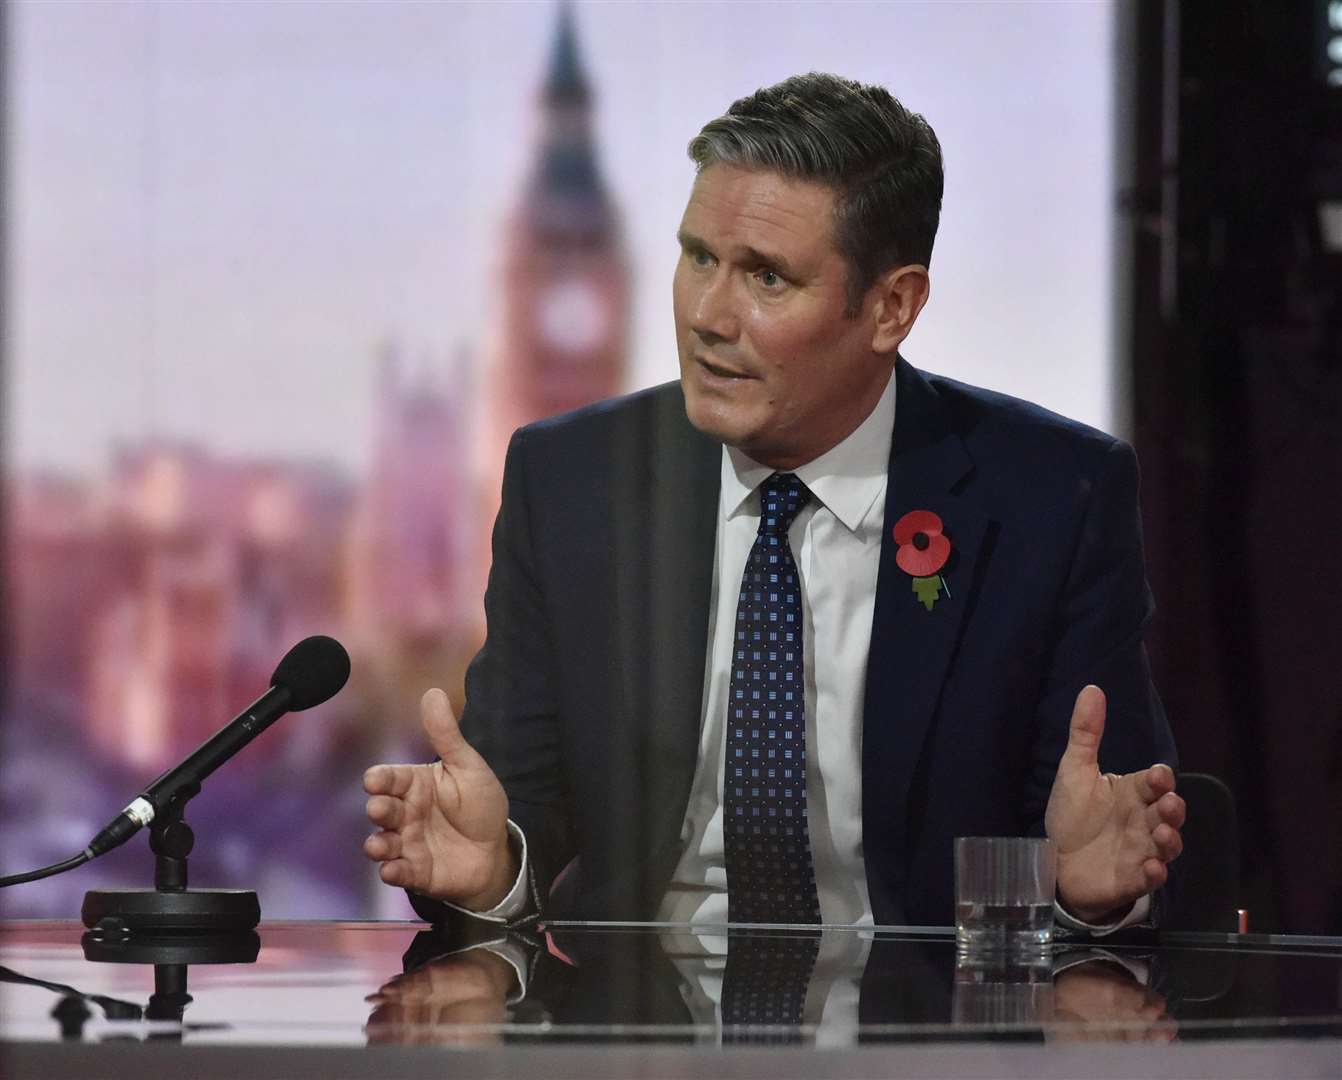 Sir Keir Starmer appearing on The Andrew Marr Show (Jeff Overs/BBC/PA)